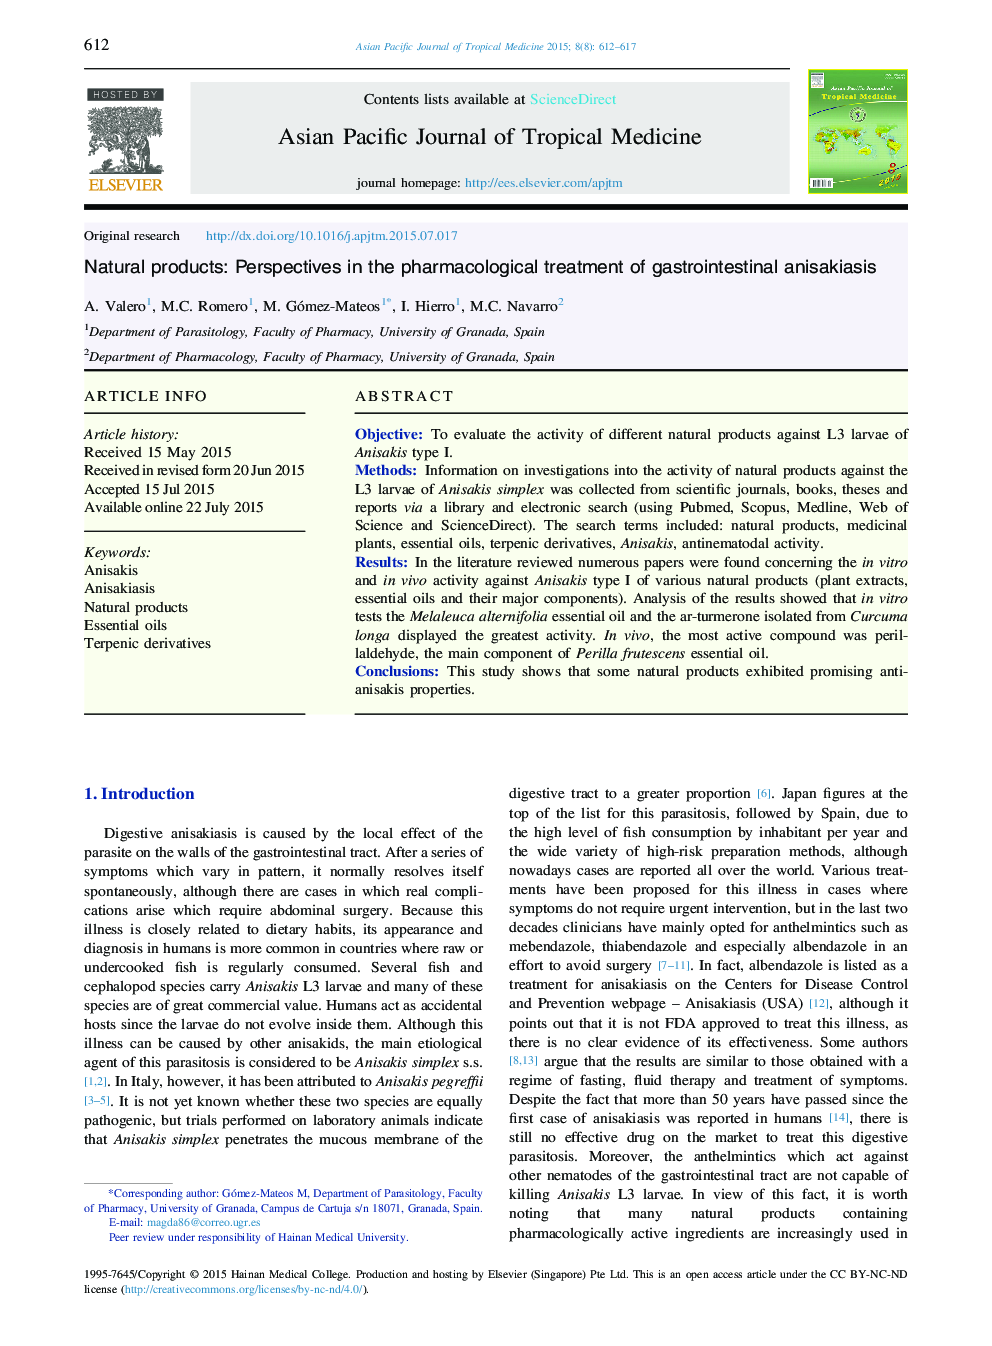 Natural products: Perspectives in the pharmacological treatment of gastrointestinal anisakiasis 